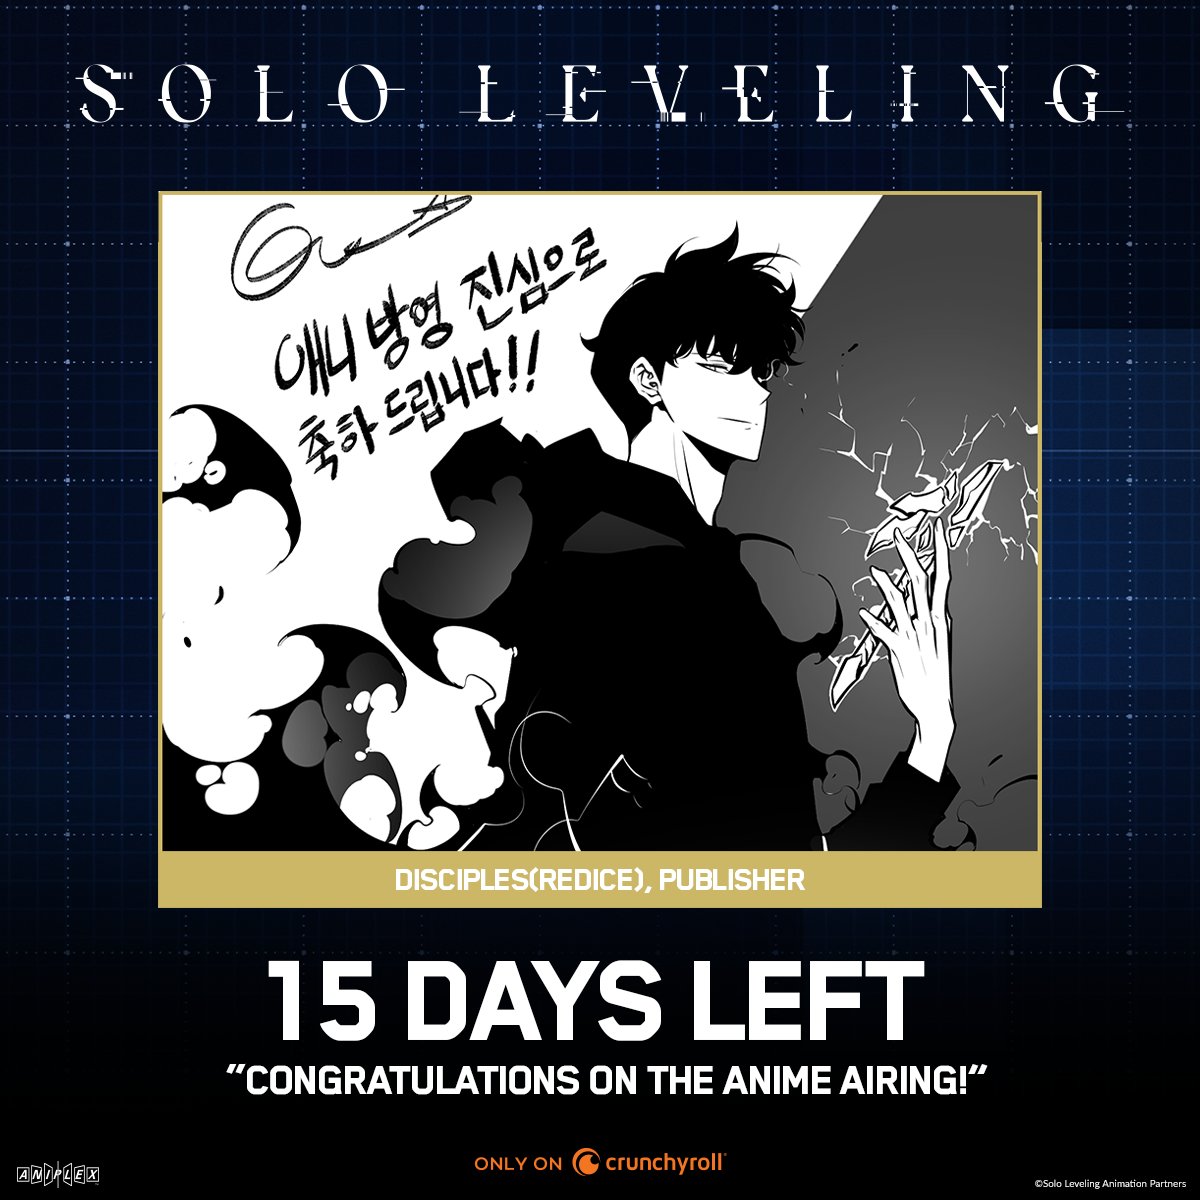 Solo Leveling on X: 15 days until Solo Leveling premieres! Check out these  special messages from Chugong and DISCIPLES(REDICE)! #SoloLeveling   / X